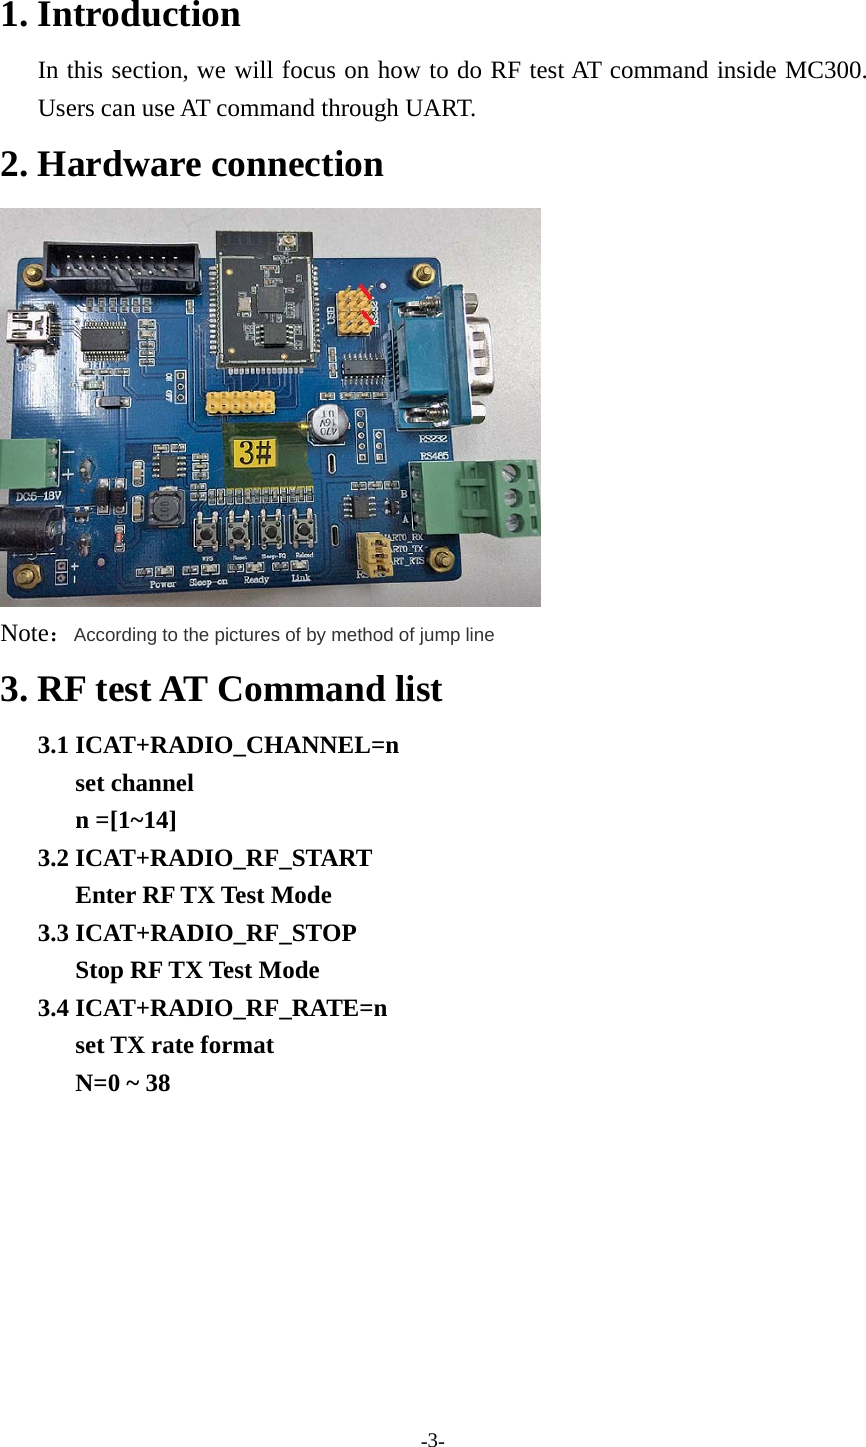 -3-1. IntroductionIn this section, we will focus on how to do RF test AT command inside MC300.Users can use AT command through UART.2. Hardware connectionNote：According to the pictures of by method of jump line3. RF test AT Command list3.1 ICAT+RADIO_CHANNEL=nset channeln =[1~14]3.2 ICAT+RADIO_RF_STARTEnter RF TX Test Mode3.3 ICAT+RADIO_RF_STOPStop RF TX Test Mode3.4 ICAT+RADIO_RF_RATE=nset TX rate formatN=0 ~ 38